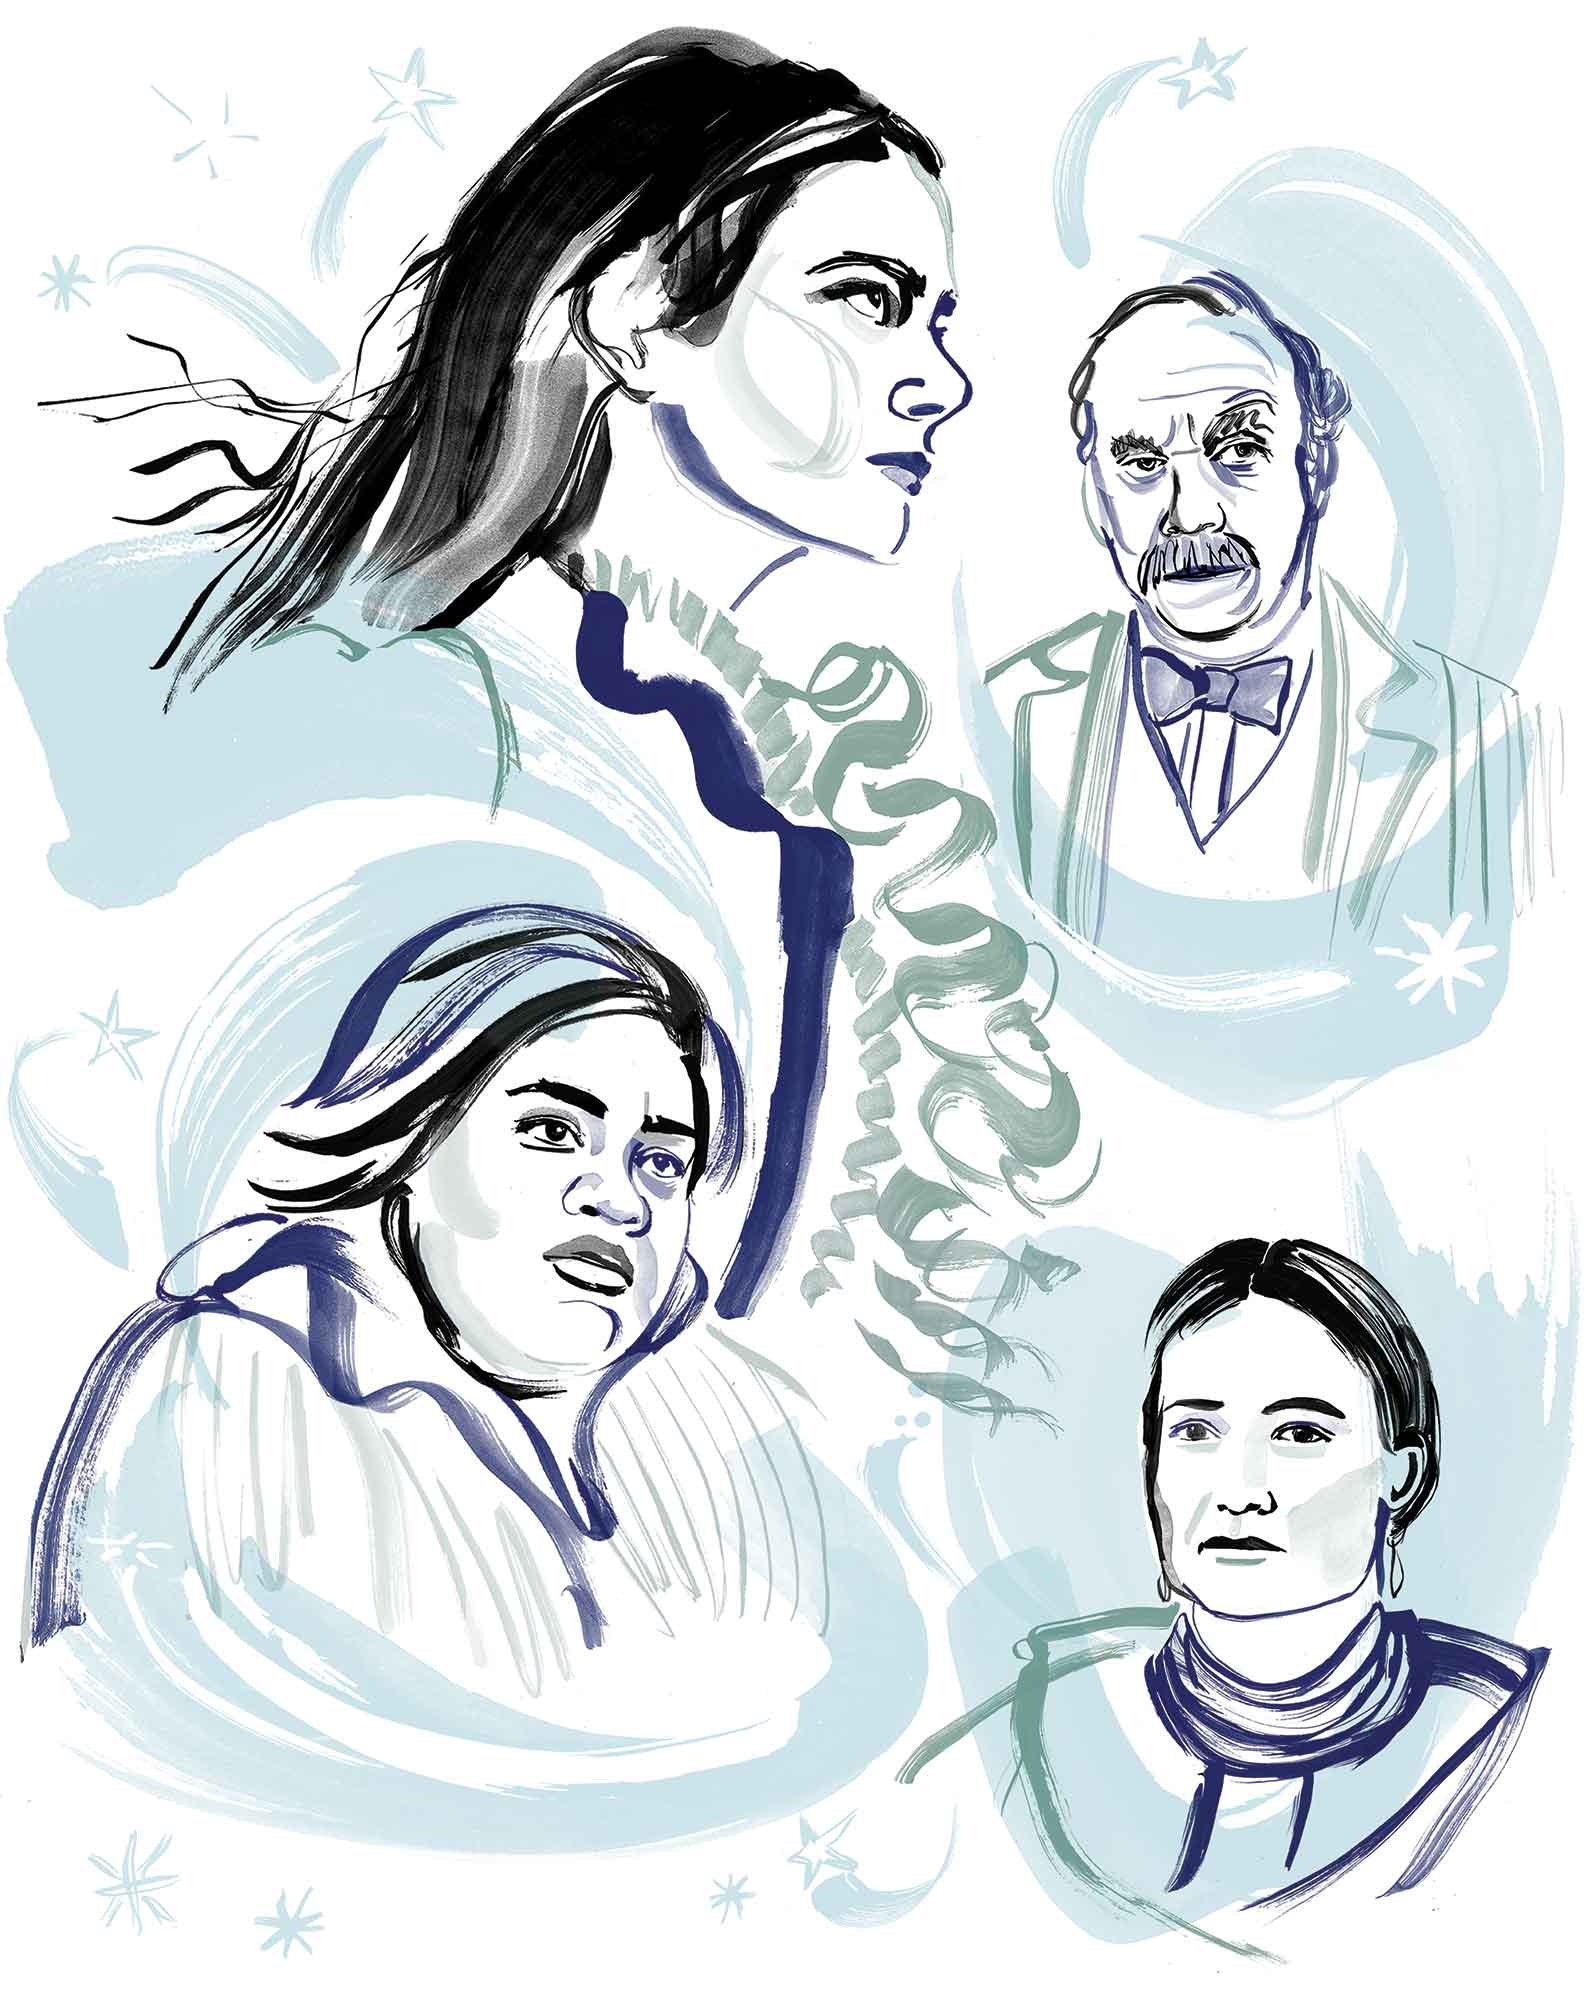 Illustrated portrait of Hollywood actors for LA Times. Oscar nominations. Portrait of Emma Stone for Poor Things, Paul Giamatti for The Holdovers. Da'Vine Joy Randolph for The Holdovers. Lily Gladstone for Killers of the Flower Moon. Ink brushstroke portrait, energetic brushstrokes, fashion illustration style. Article on The nominations for Academy Awards 2024